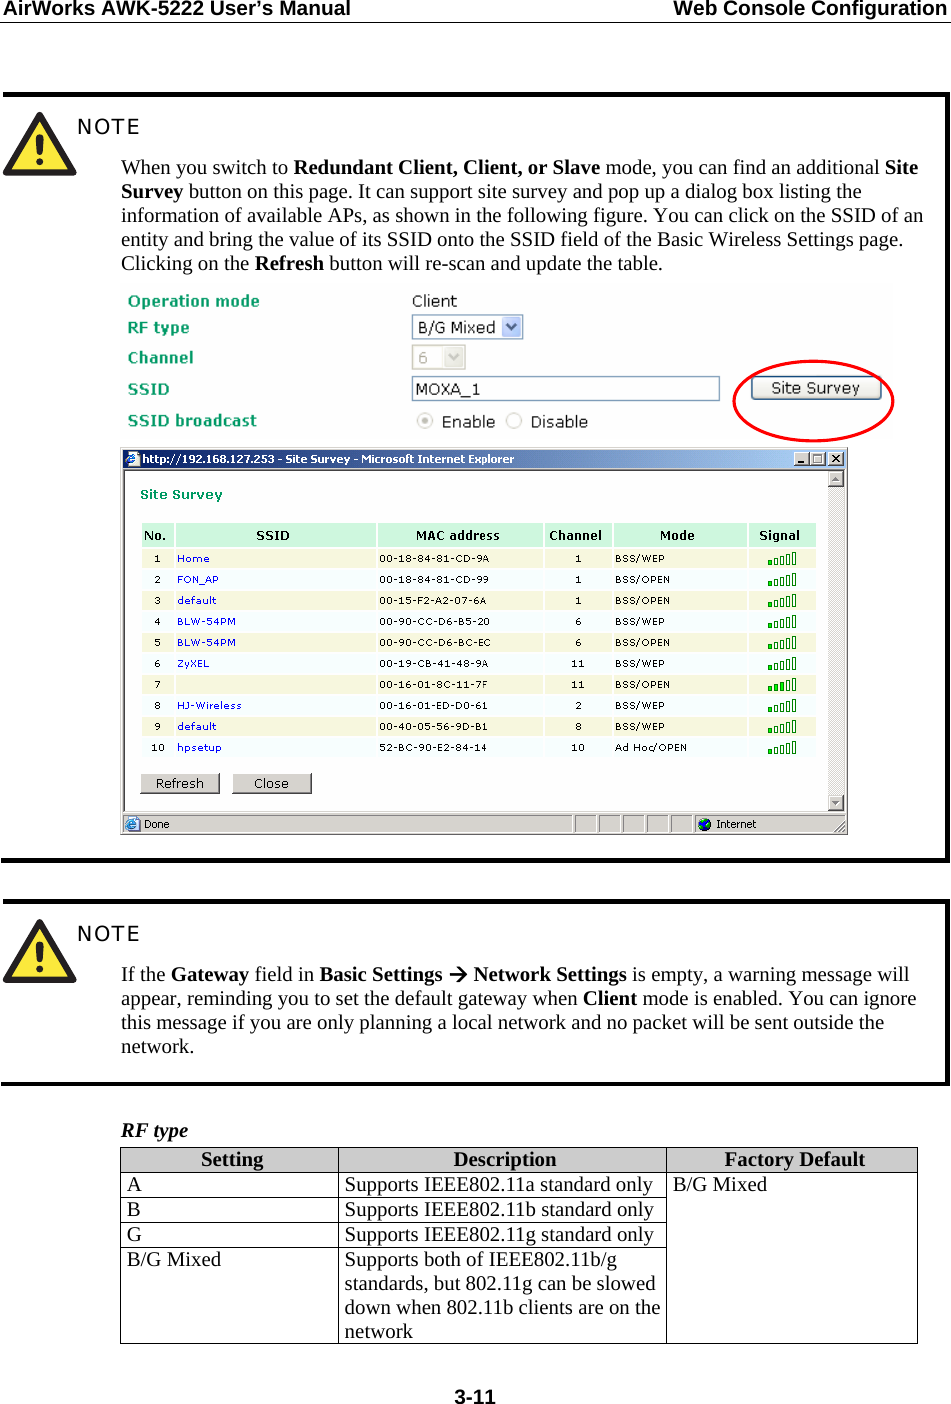 AirWorks AWK-5222 User’s Manual  Web Console Configuration  3-11  NOTE When you switch to Redundant Client, Client, or Slave mode, you can find an additional Site Survey button on this page. It can support site survey and pop up a dialog box listing the information of available APs, as shown in the following figure. You can click on the SSID of an entity and bring the value of its SSID onto the SSID field of the Basic Wireless Settings page. Clicking on the Refresh button will re-scan and update the table.     NOTE If the Gateway field in Basic Settings Æ Network Settings is empty, a warning message will appear, reminding you to set the default gateway when Client mode is enabled. You can ignore this message if you are only planning a local network and no packet will be sent outside the network.  RF type Setting  Description  Factory Default A  Supports IEEE802.11a standard onlyB  Supports IEEE802.11b standard onlyG  Supports IEEE802.11g standard onlyB/G Mixed  Supports both of IEEE802.11b/g standards, but 802.11g can be slowed down when 802.11b clients are on the network B/G Mixed   